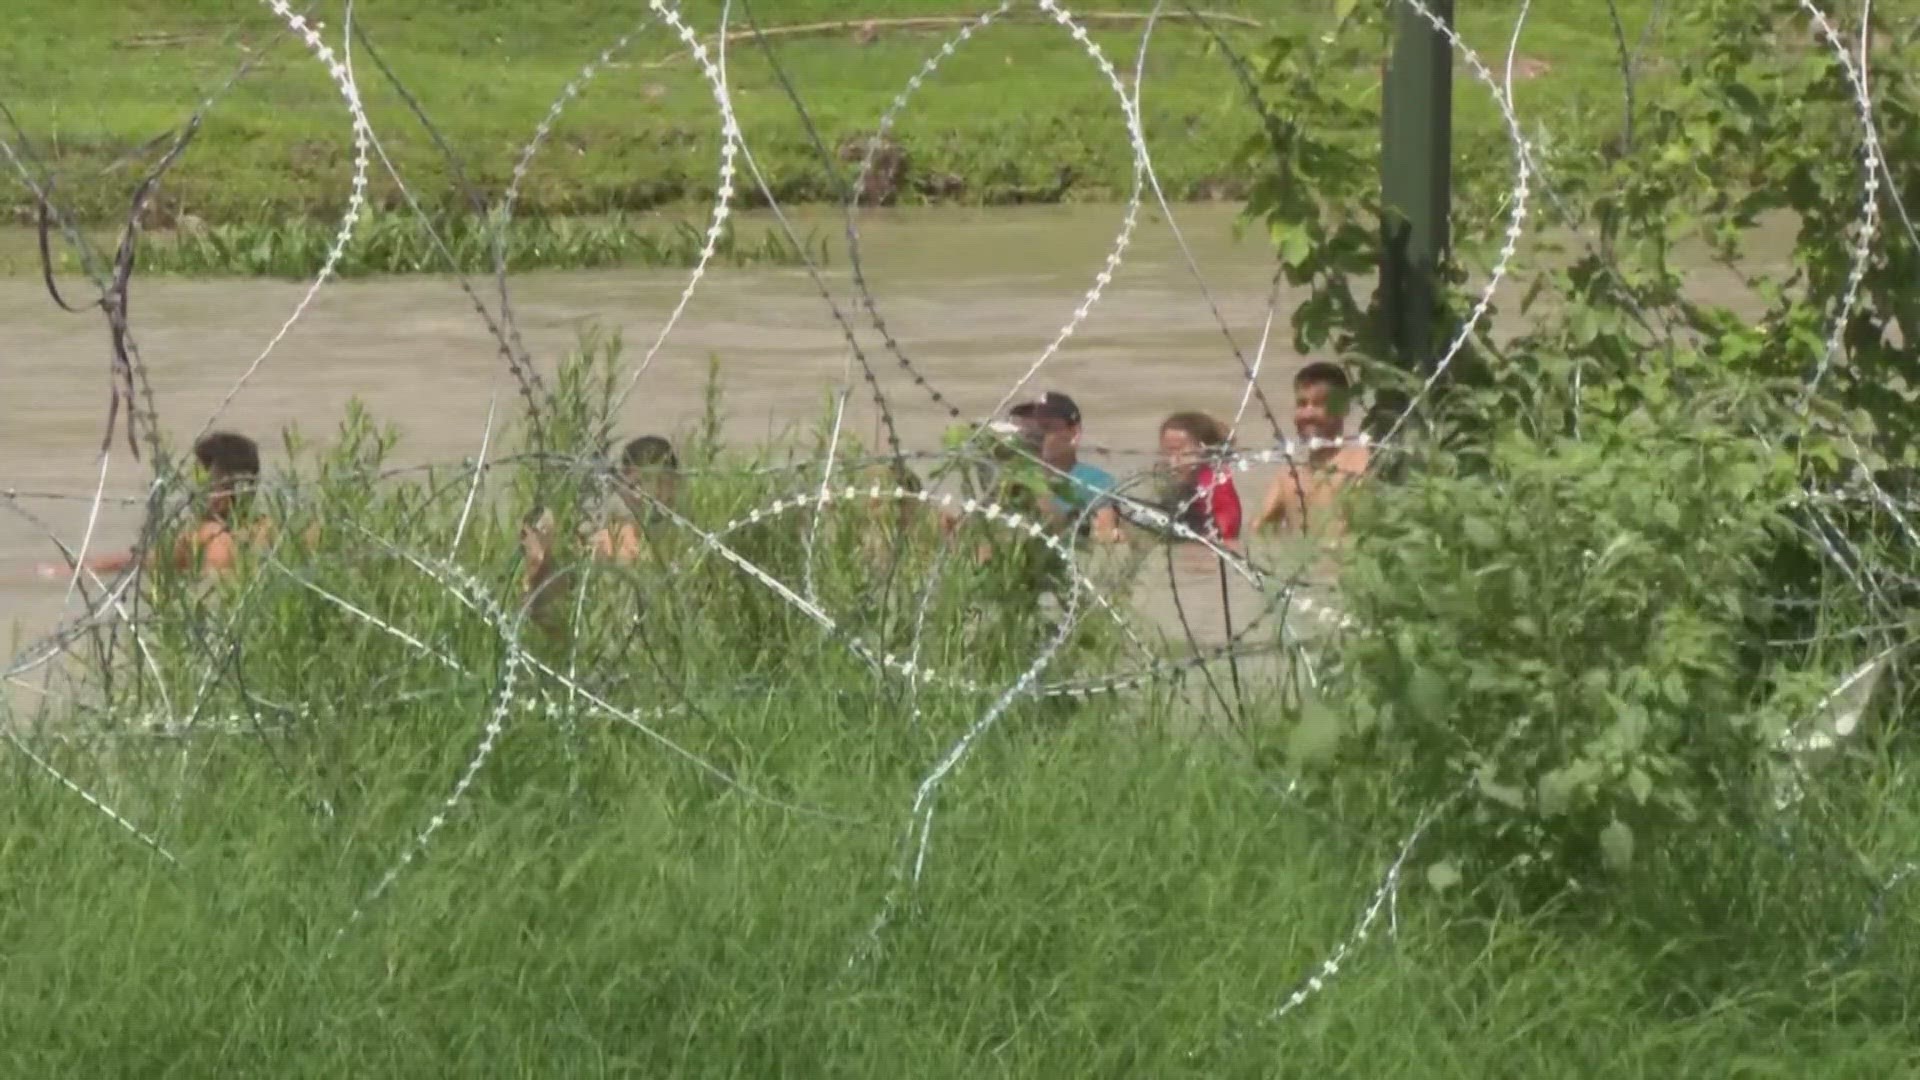 Troopers claim they were given orders to push migrants back into the Rio Grande as they attempted to cross over.